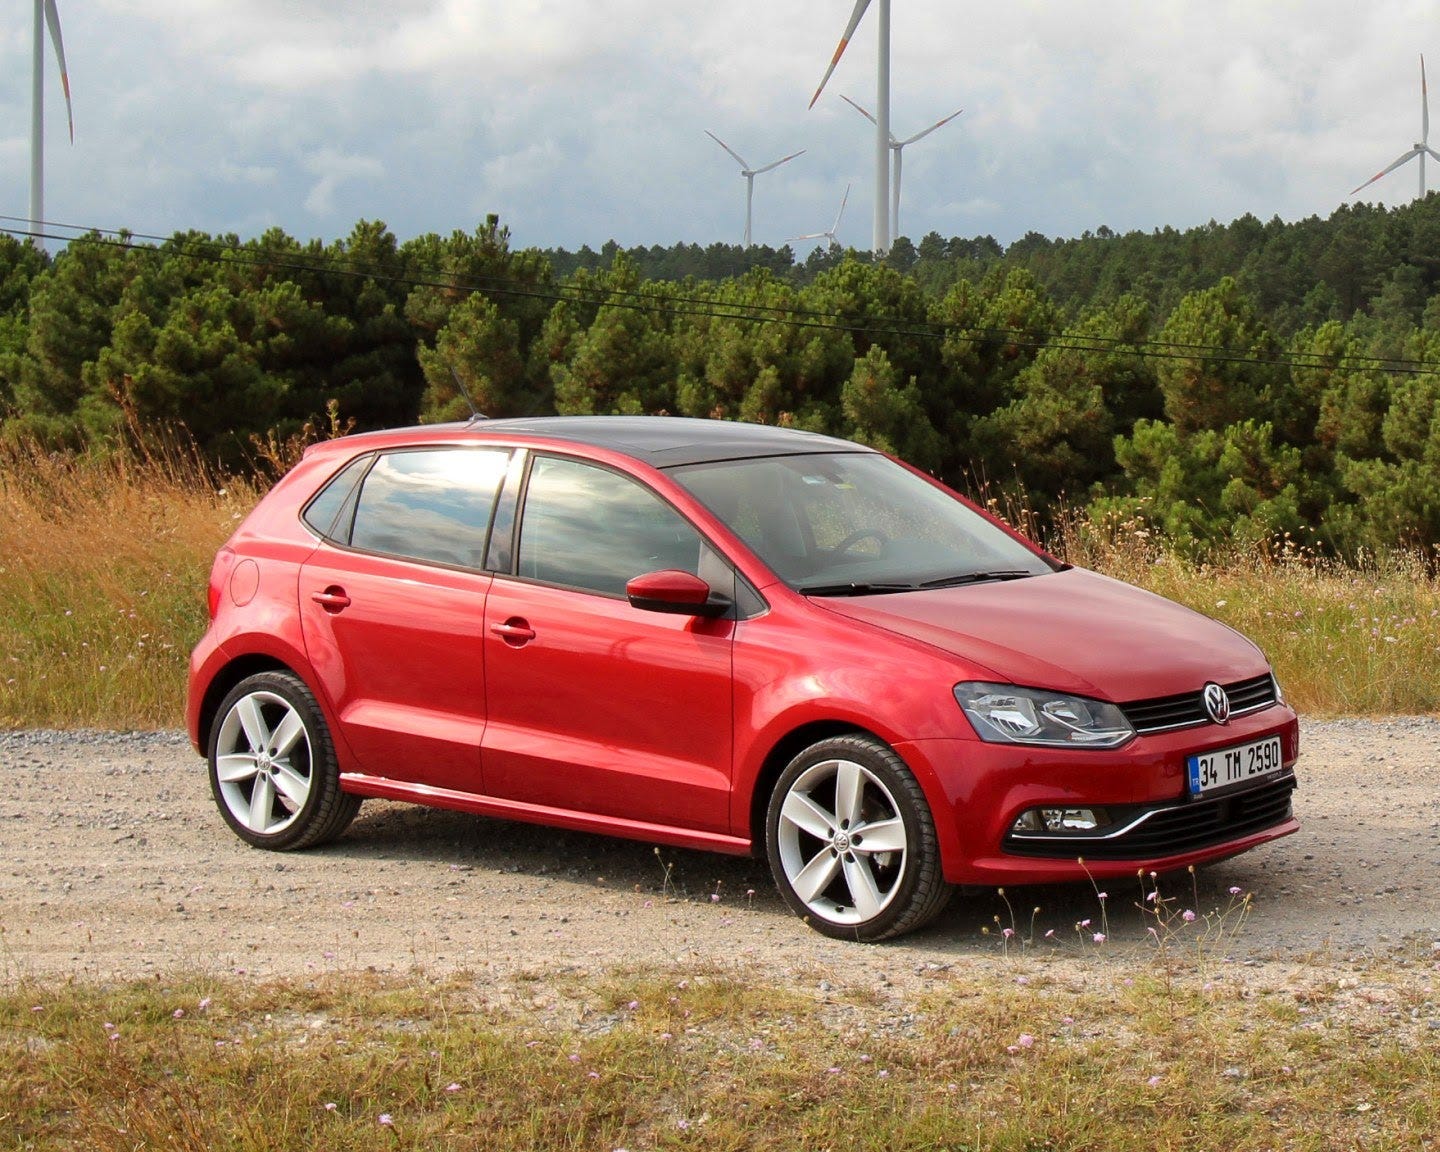 Volkswagen 1.2 Tsi Online Hotsell, UP TO 62% OFF | www.apmusicales.com